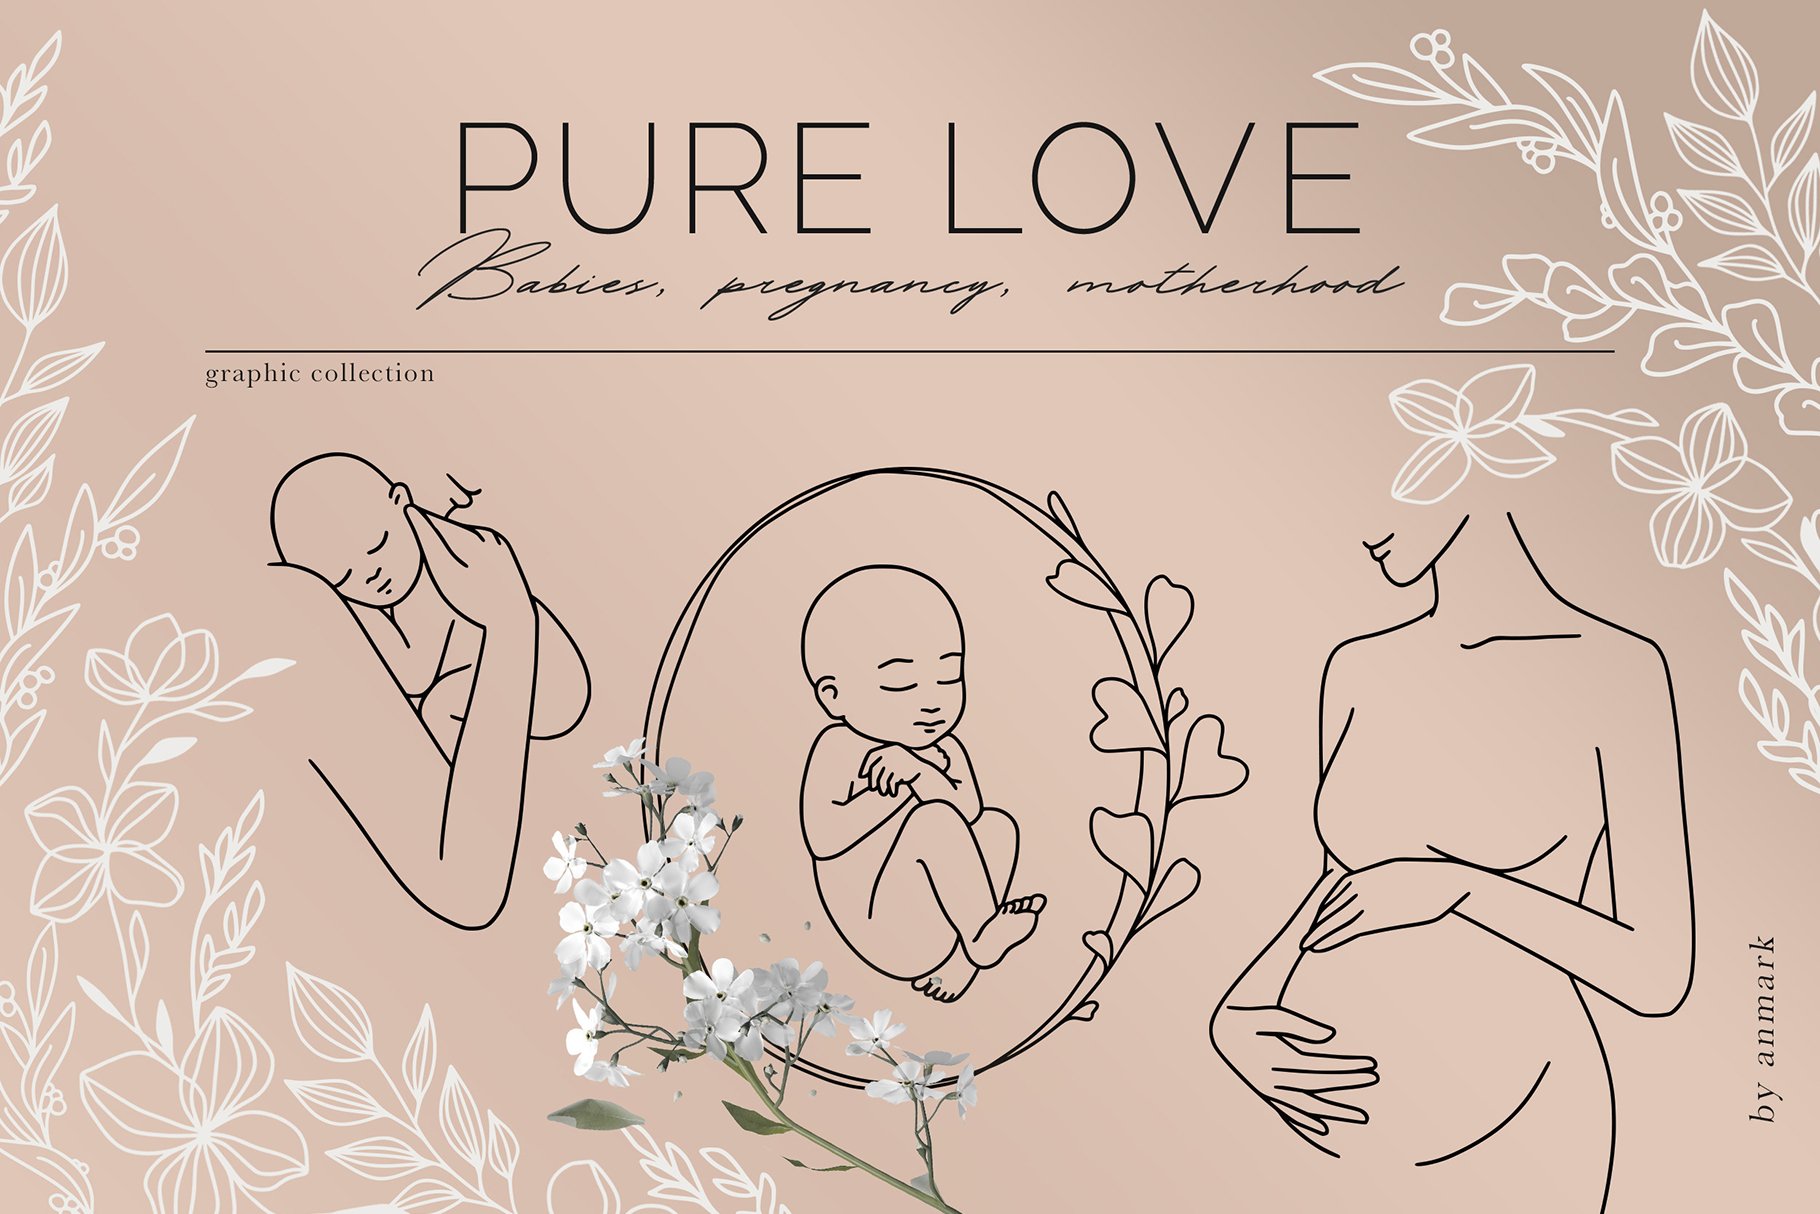 Photo & Art Print Motherhood, maternity, babies and pregnant women logos,  collection of fine, hand